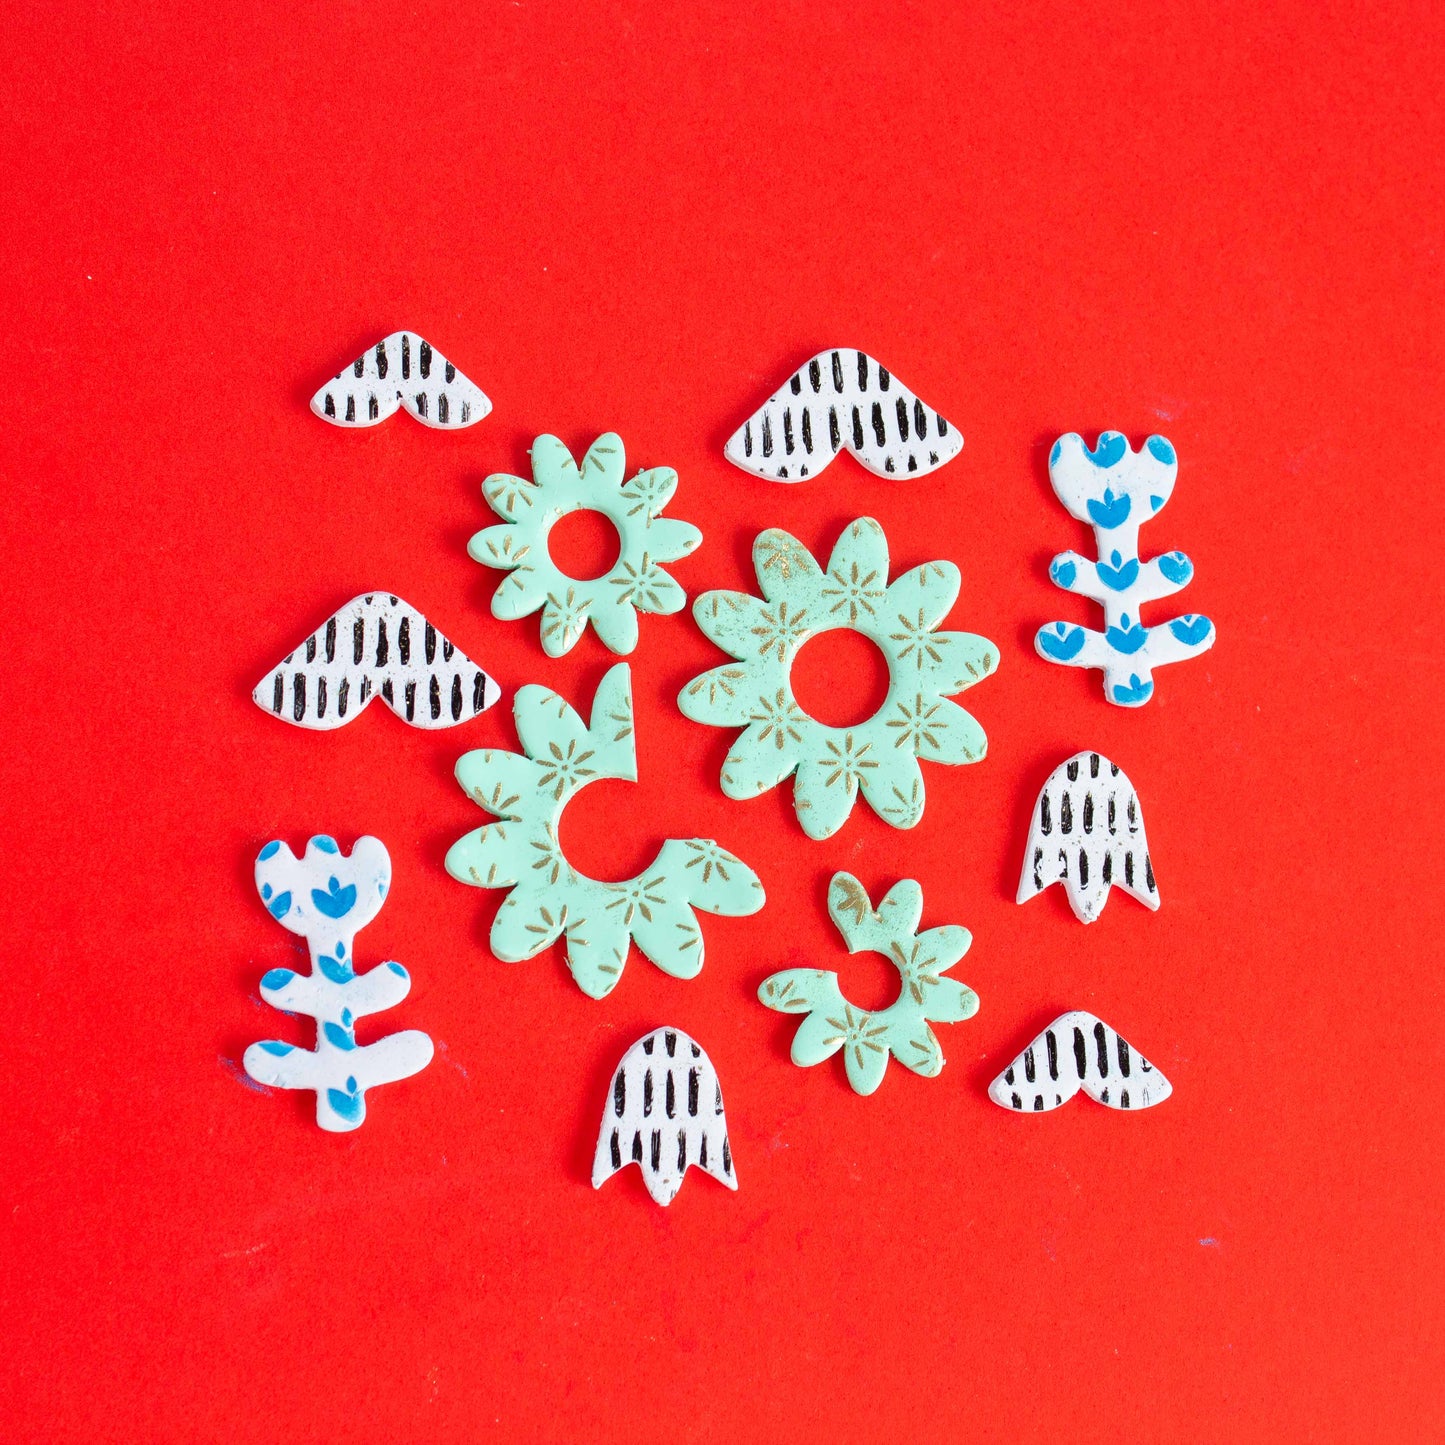 Flower shapes on a red background.